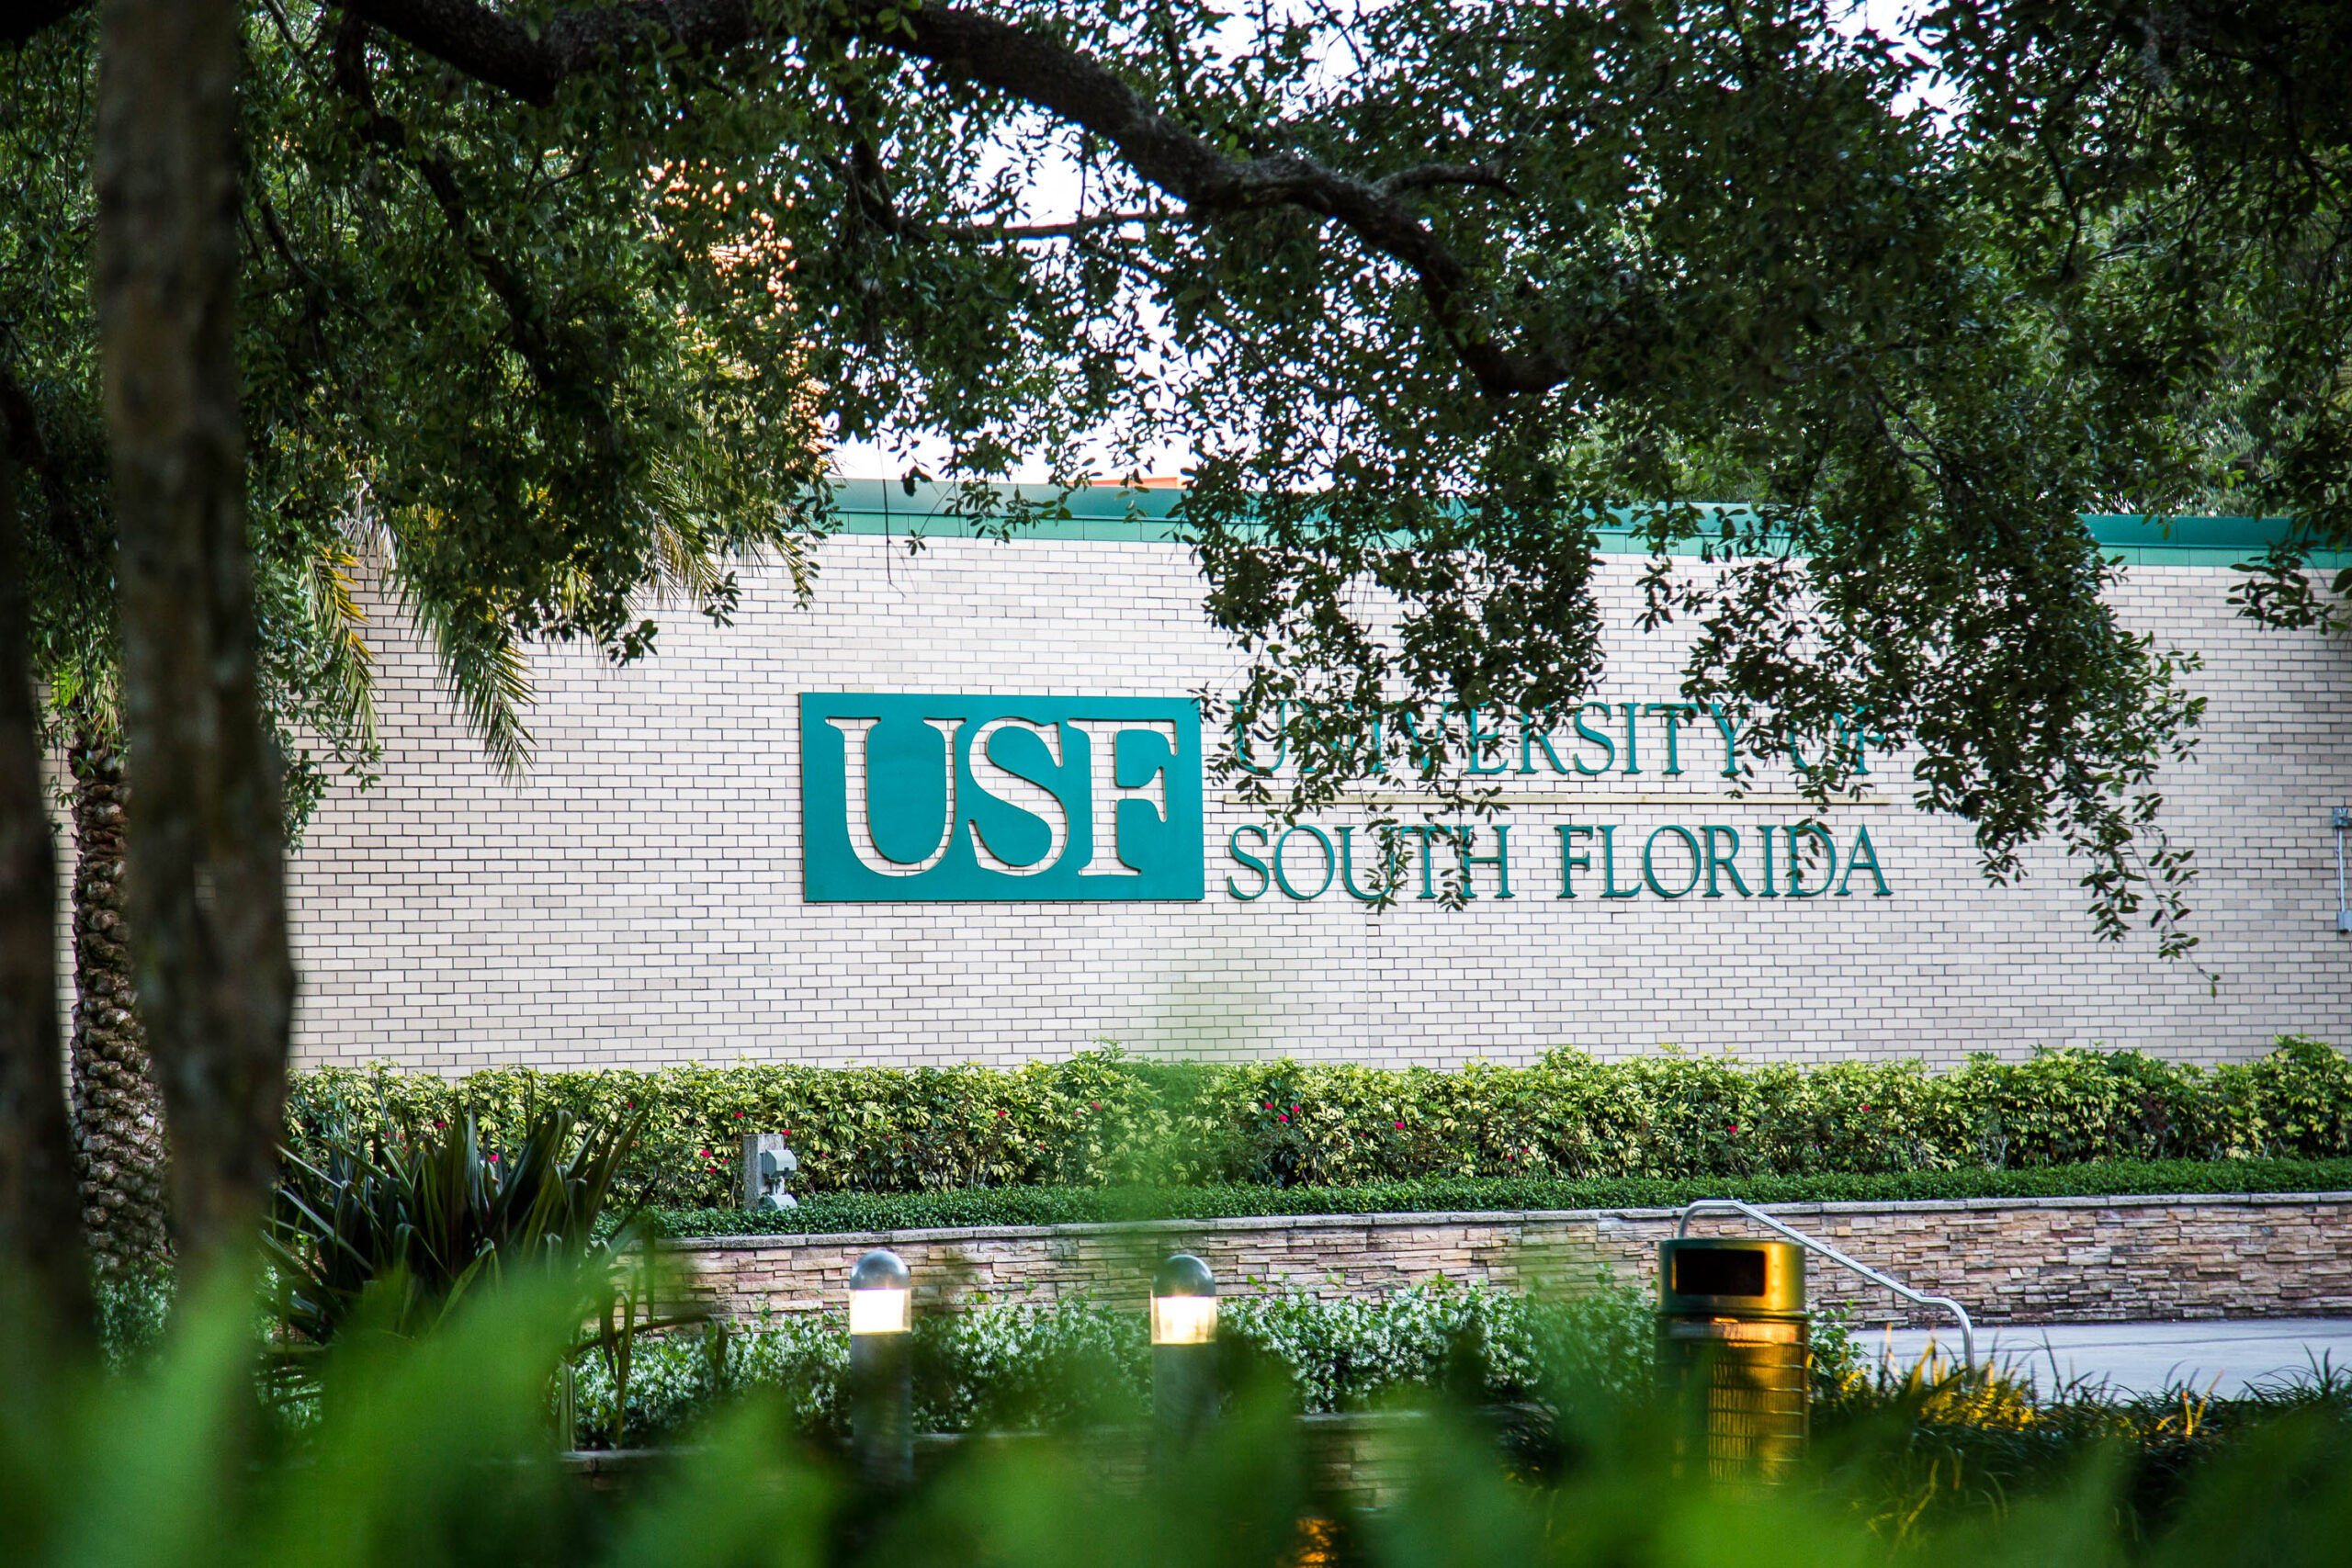 Florida bill increases regulations on faculty, sparks concern from USF professors